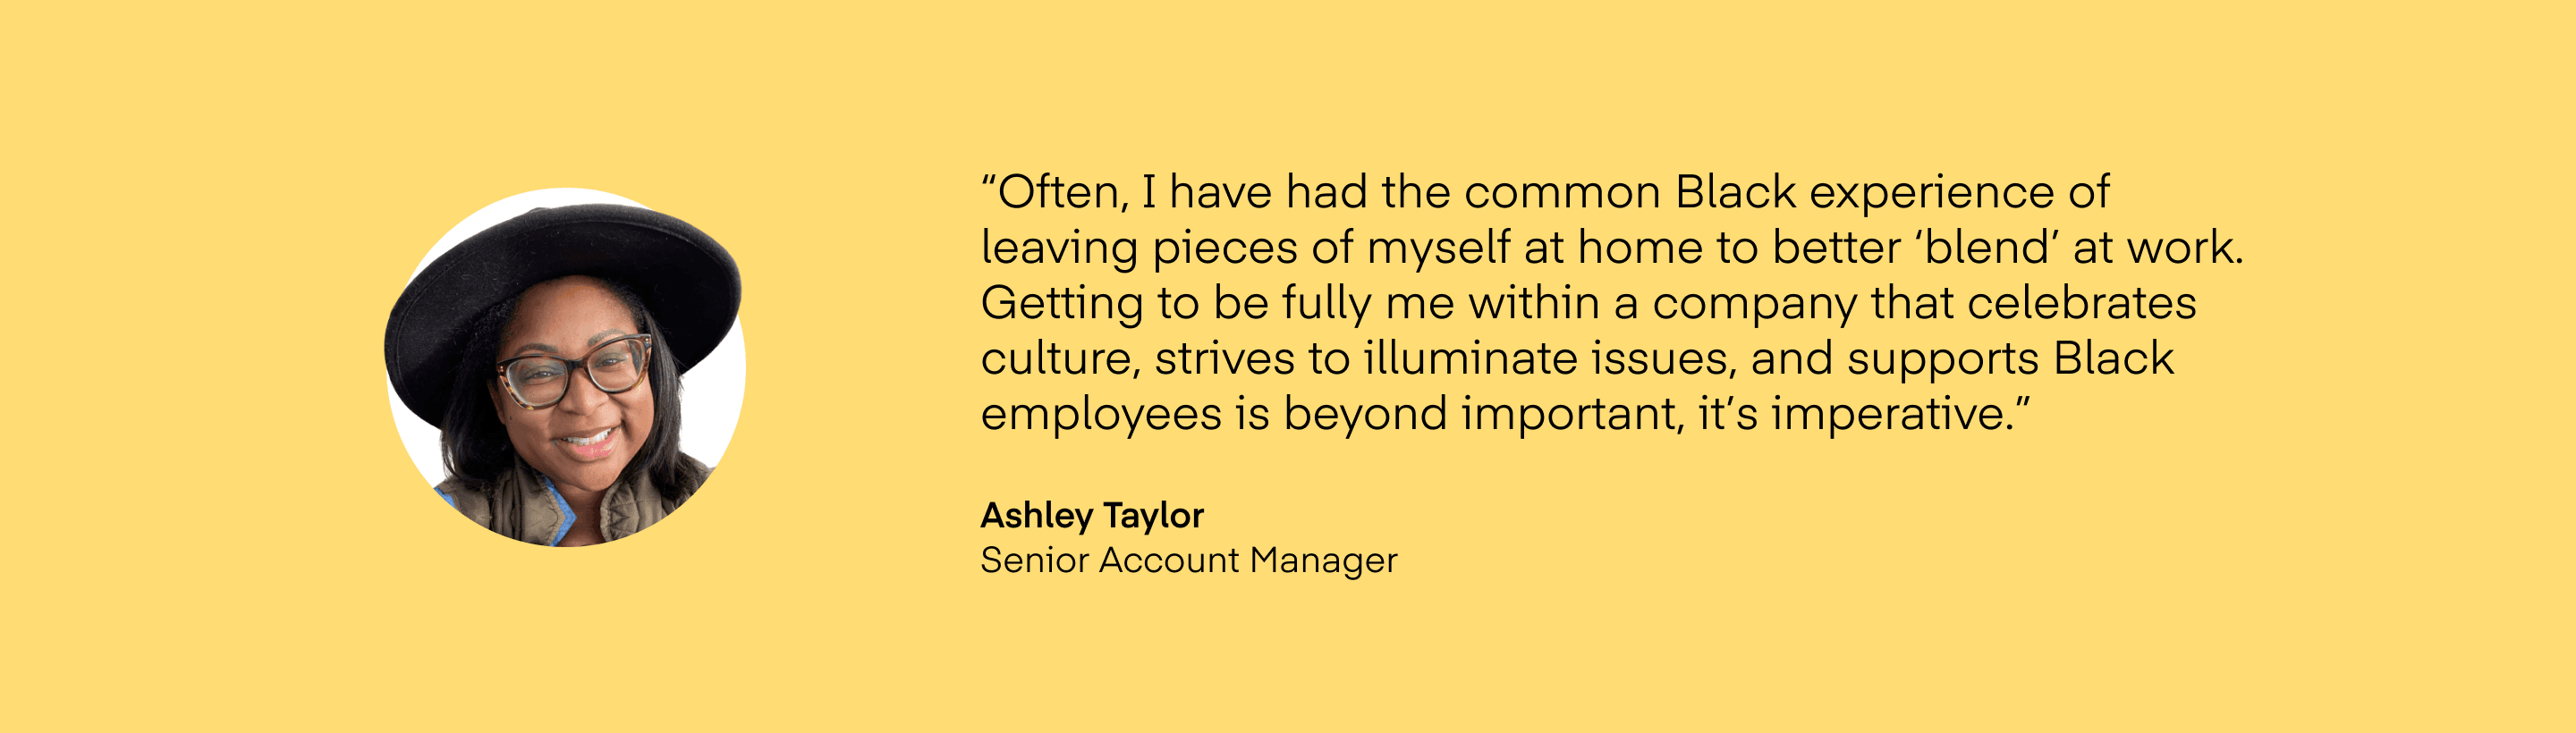 Quote and headshot from Ashley Taylor, Senior Account Manager at The Trade Desk on a yellow background